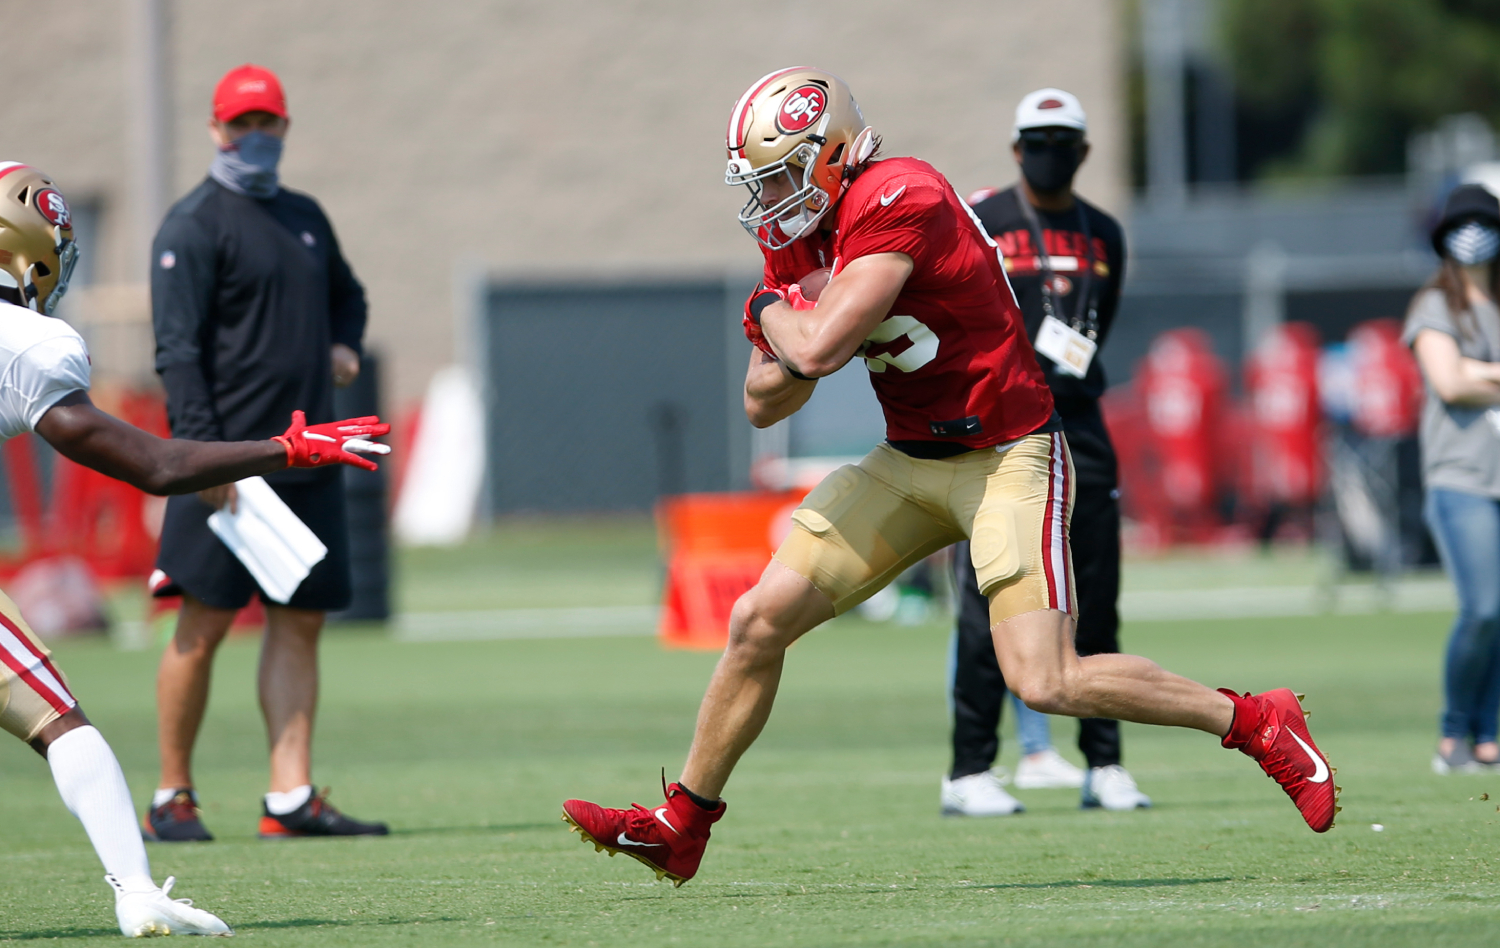 George Kittle reveals a surprising player he watches in order to improve.